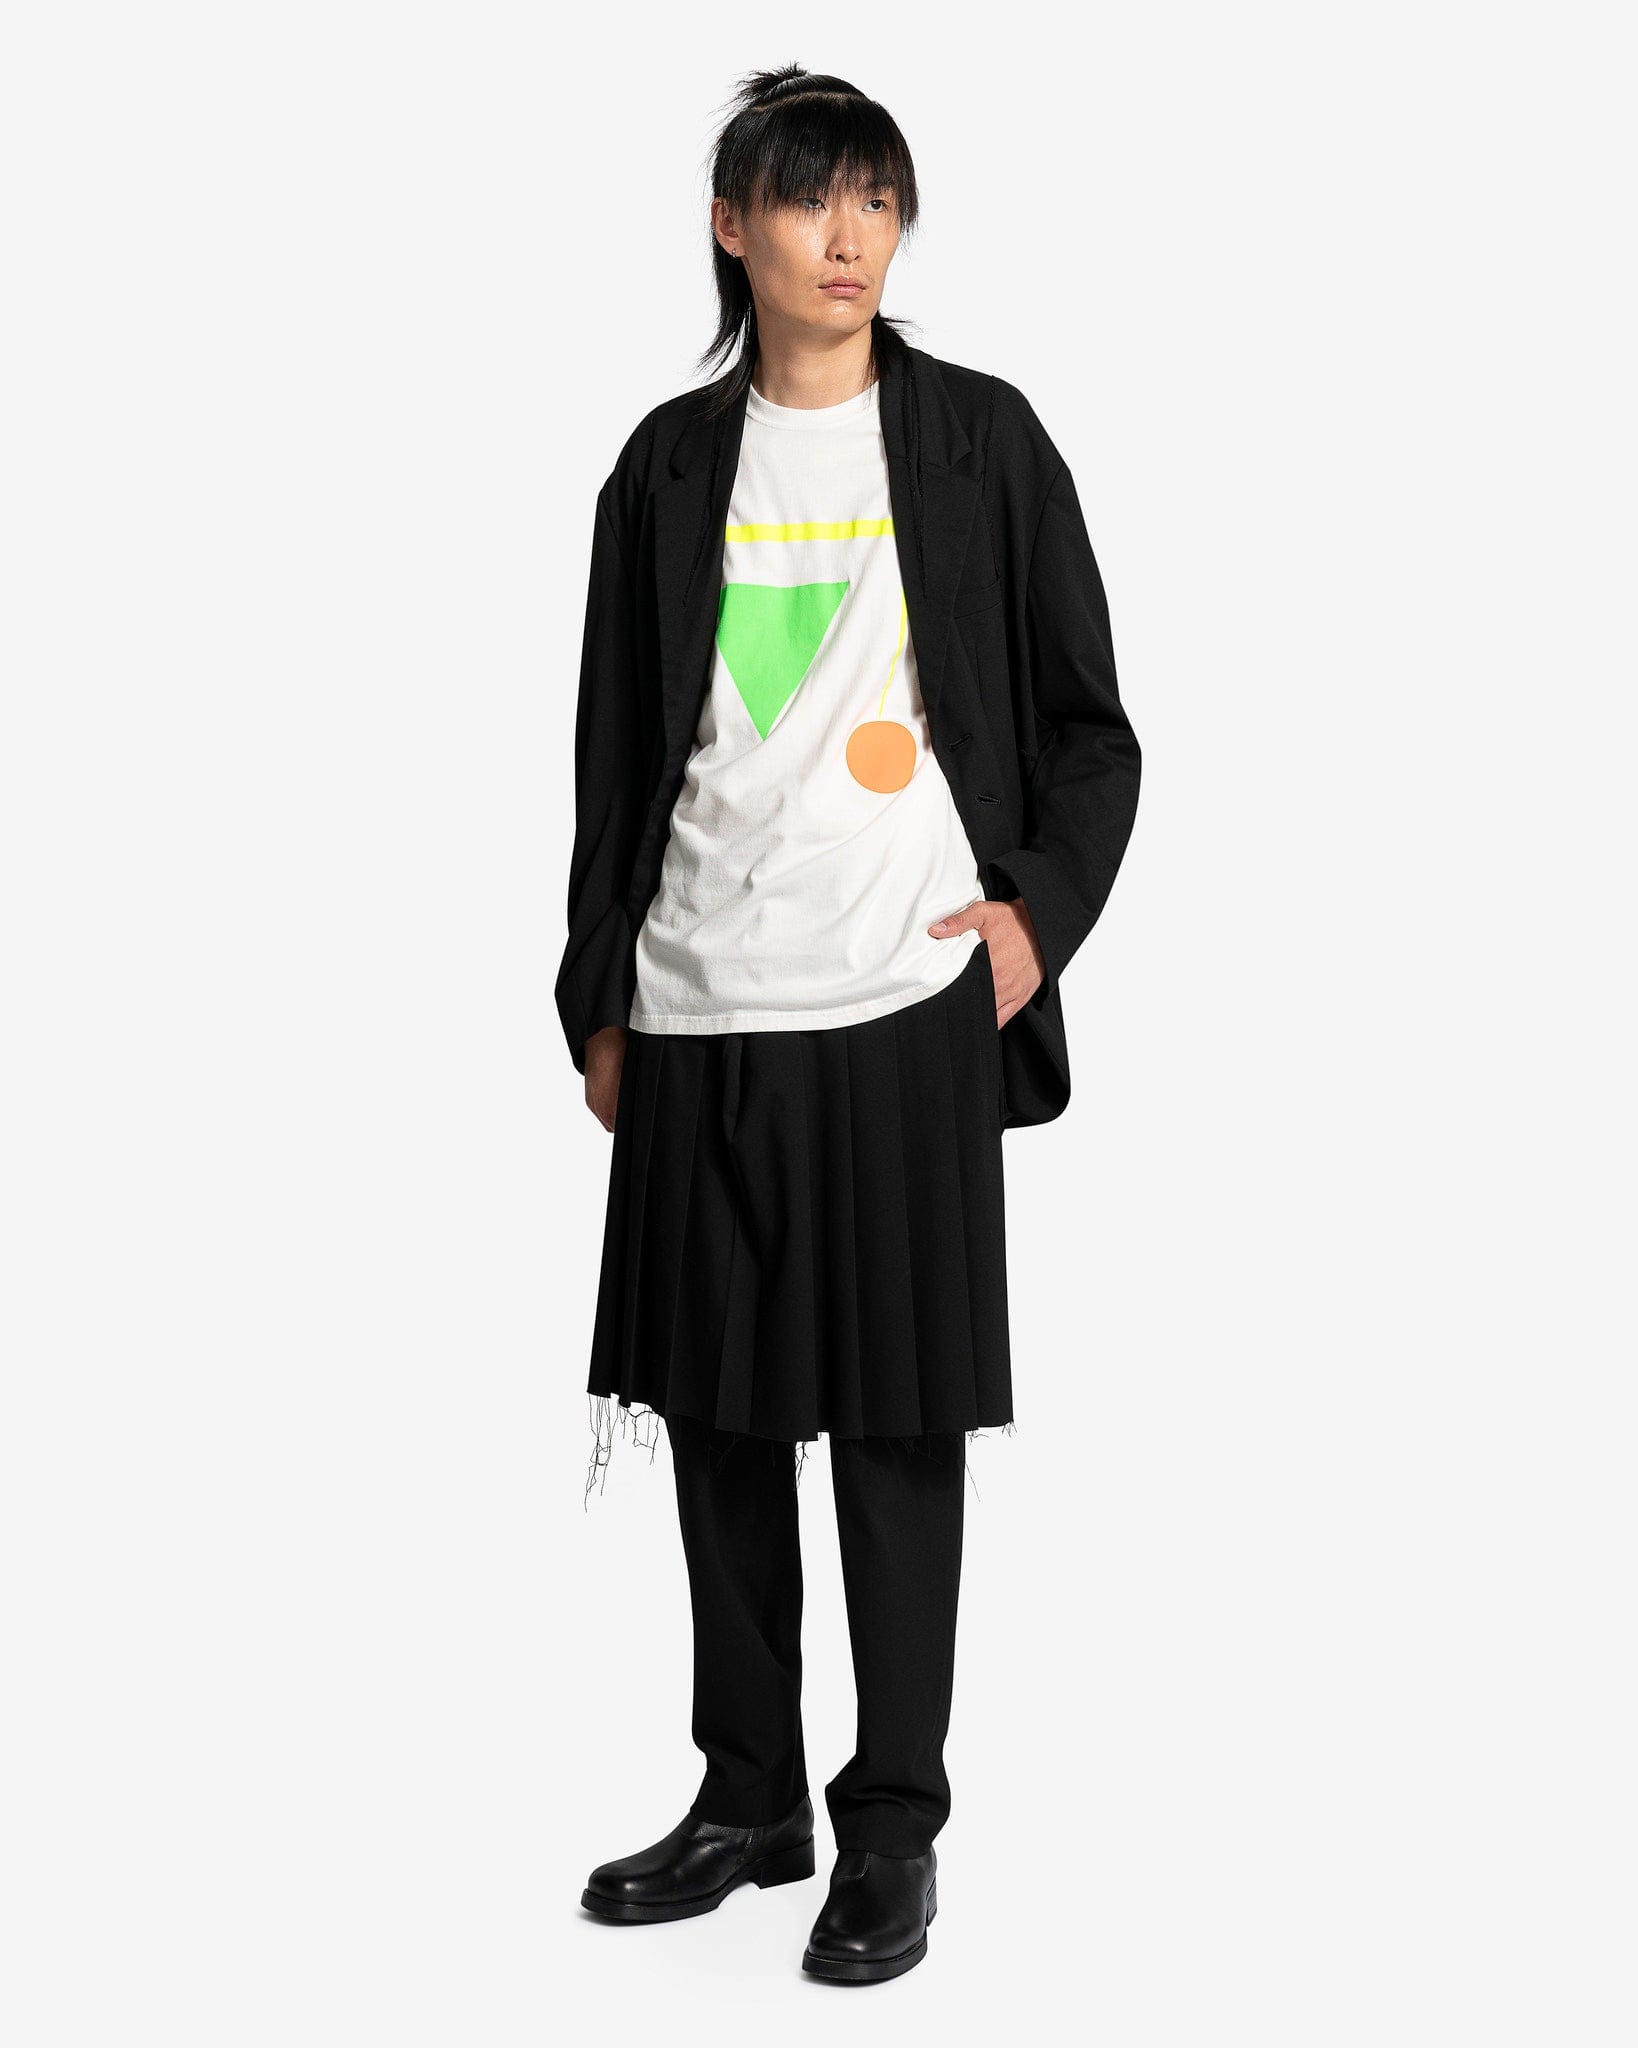 UNDERCOVER Men's T-Shirts Oversized Graphic T-Shirt in Off-White